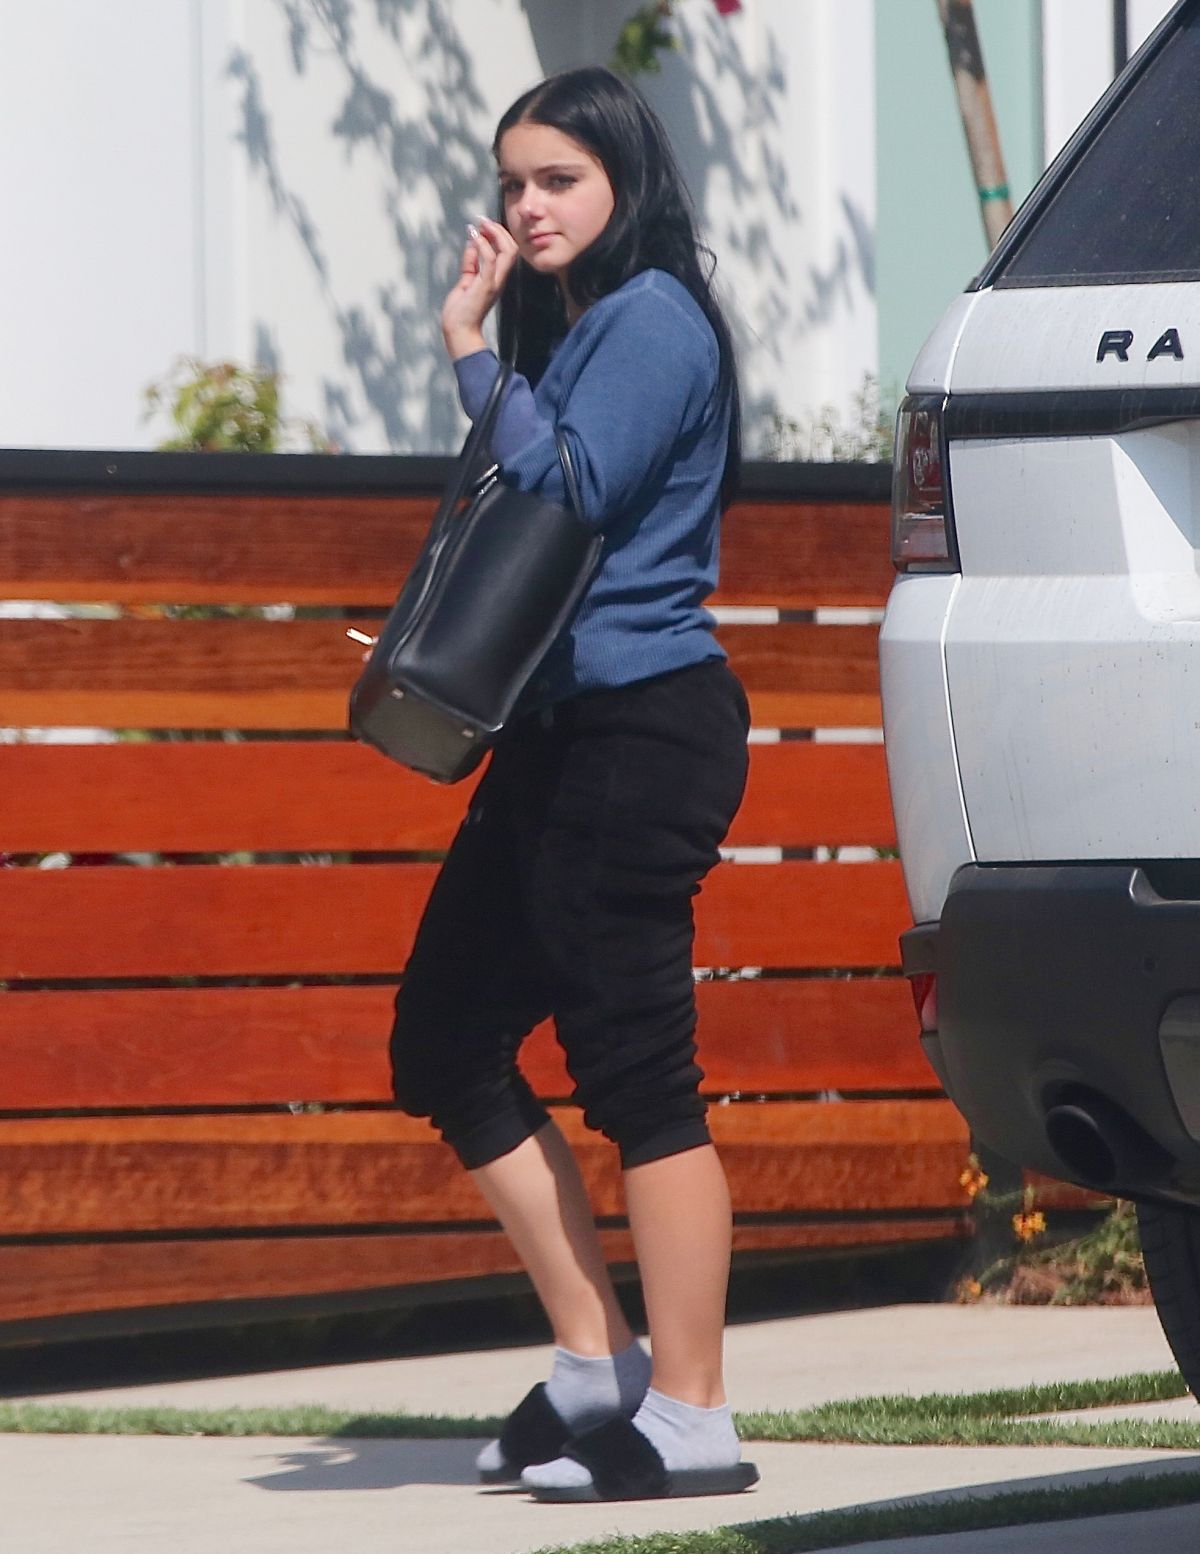 ariel-winter-out-and-about-in-los-angeles-09-20-2017-1.jpg